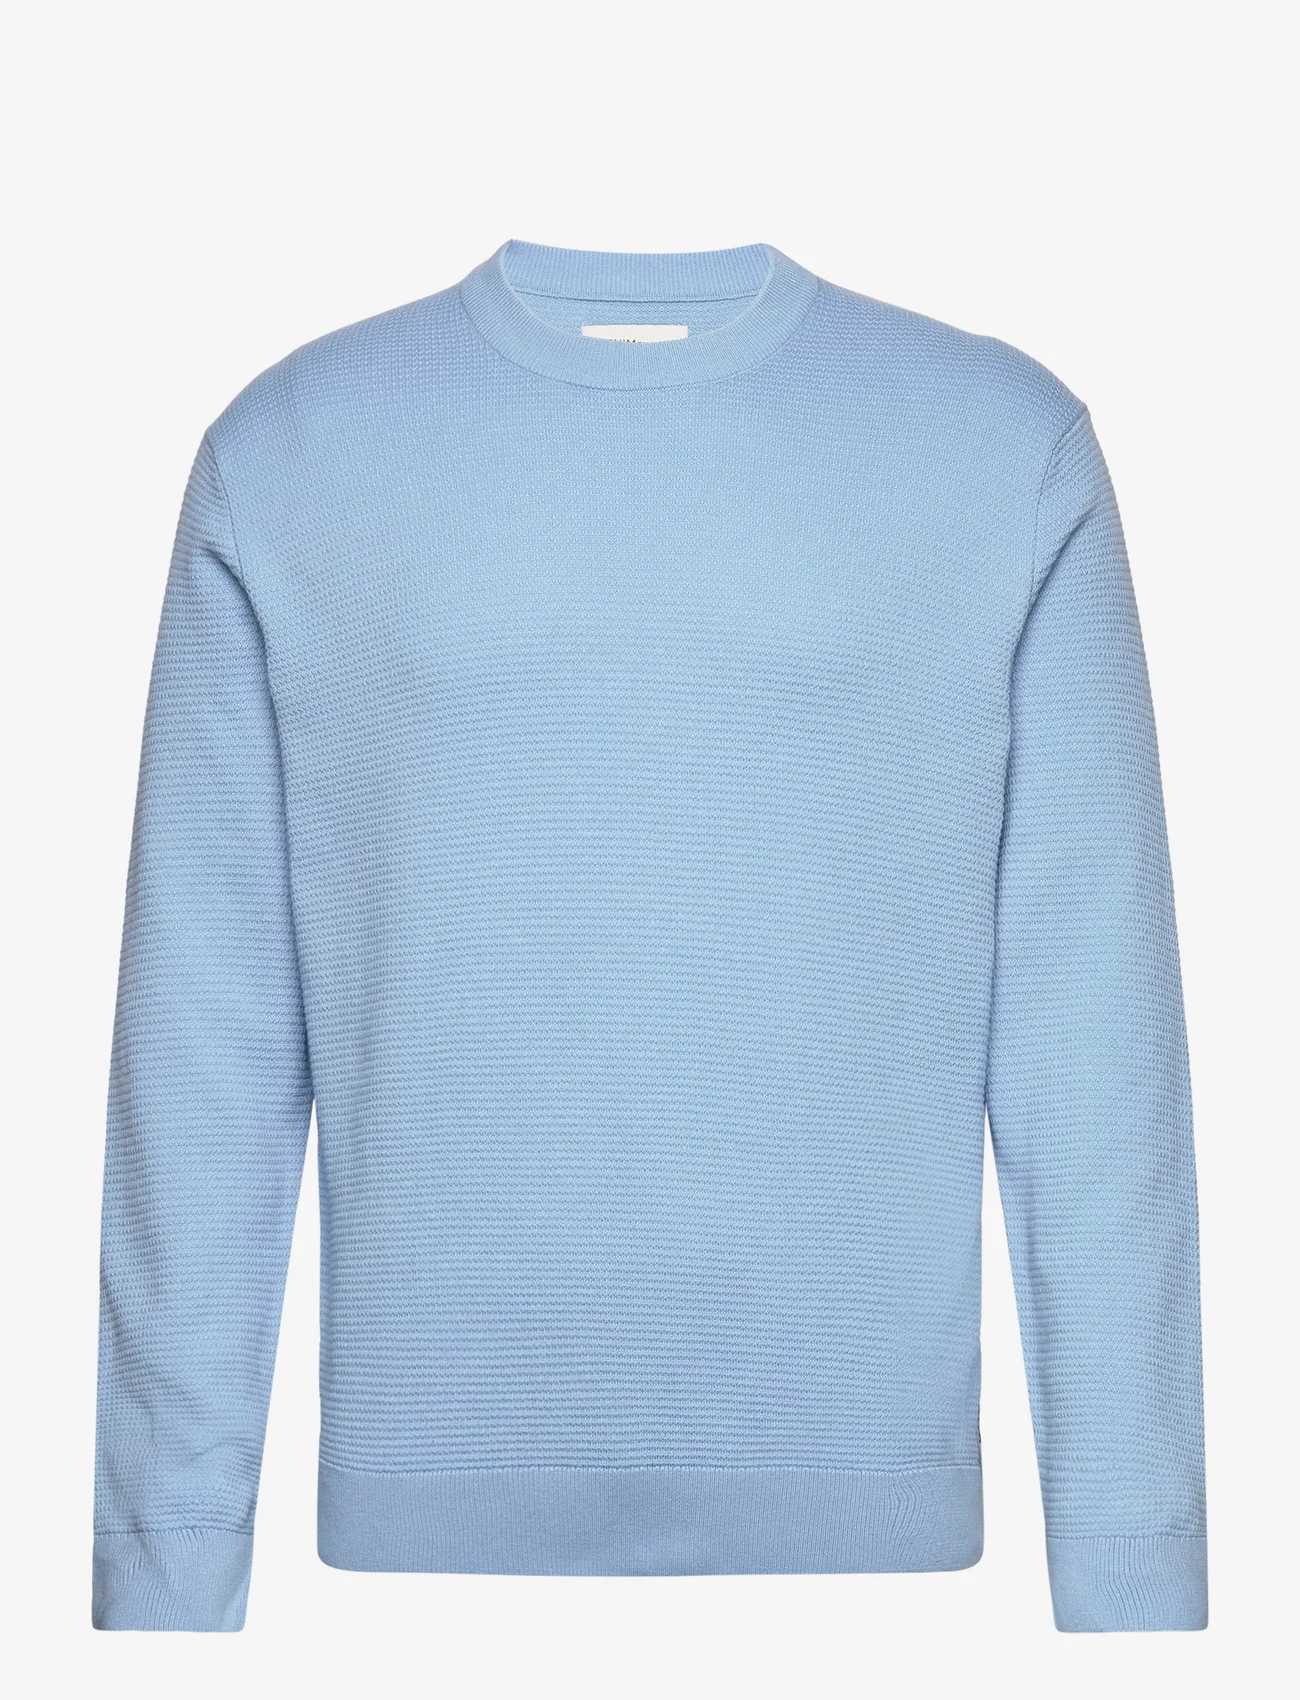 Tom Tailor - structured basic knit - die niedrigsten preise - washed out middle blue - 0